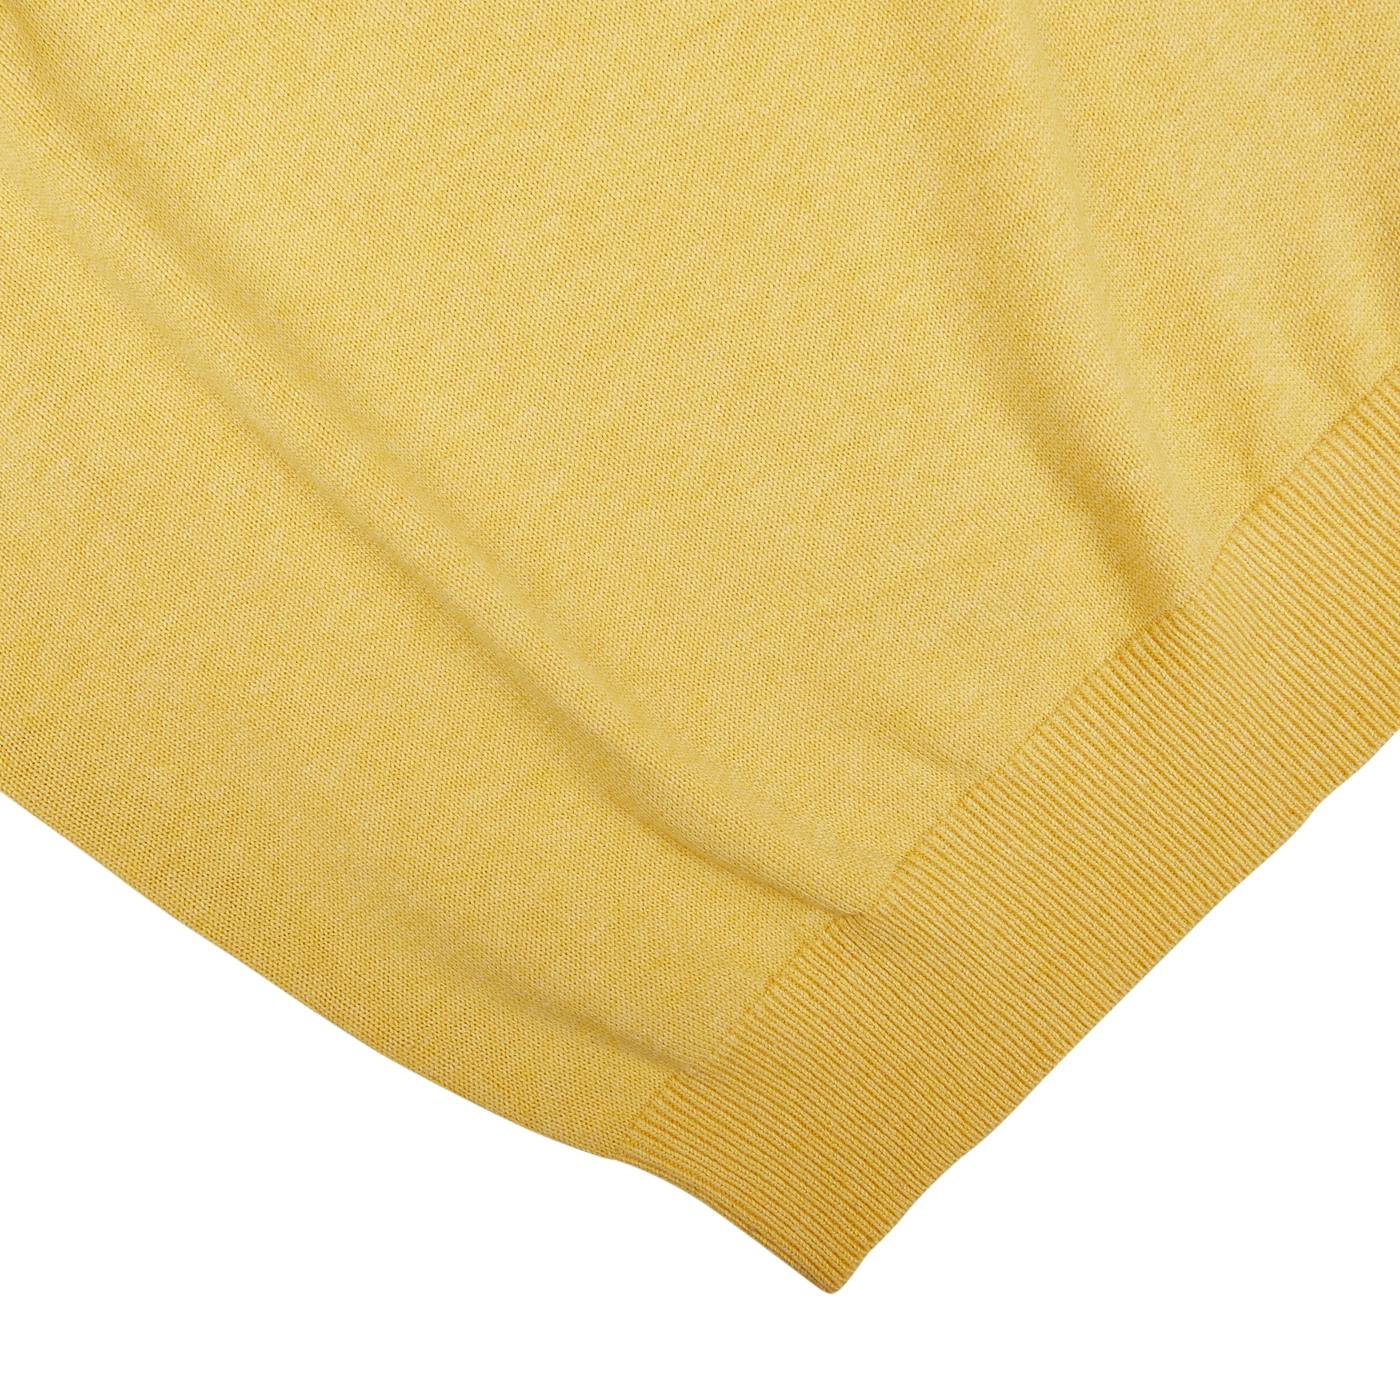 Corn Yellow Luxury Cotton Crewneck with a ribbed border detail on a white background by Alan Paine.